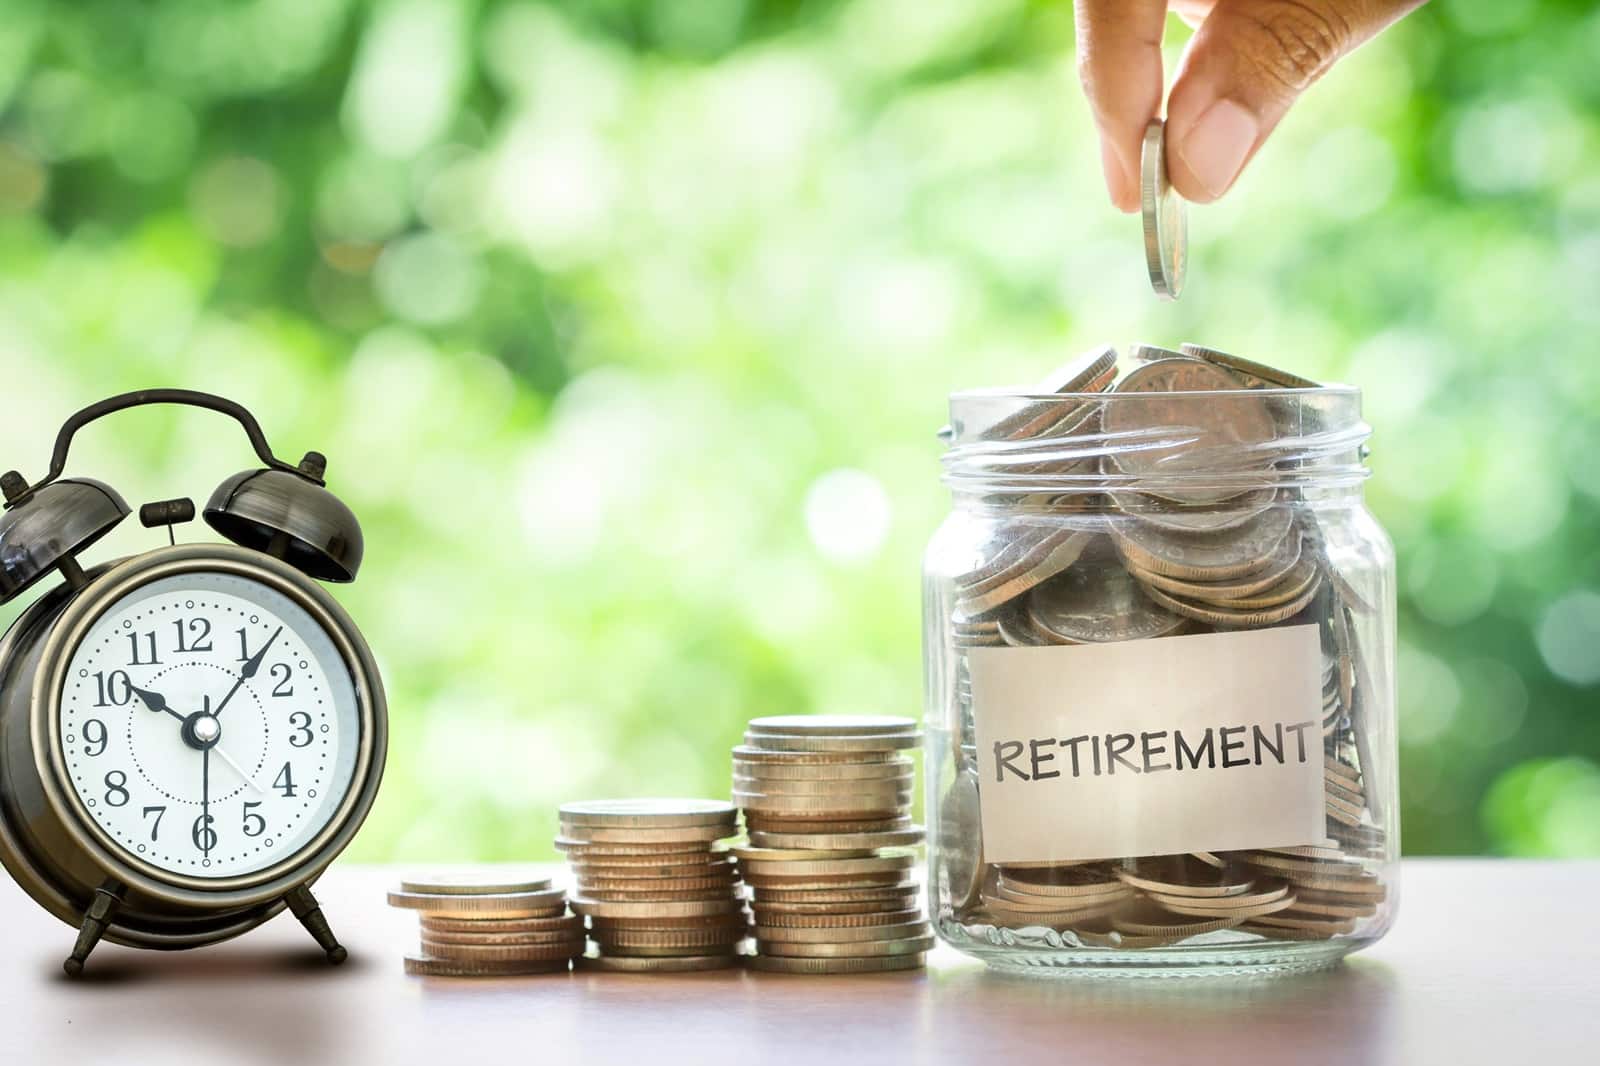 <p><span>It’s never too early to start saving for retirement. Contribute regularly to retirement accounts like a 401(k) or IRA, taking advantage of any employer matches or tax benefits available. </span></p><p><span>Your future self will thank you for starting early.</span></p>